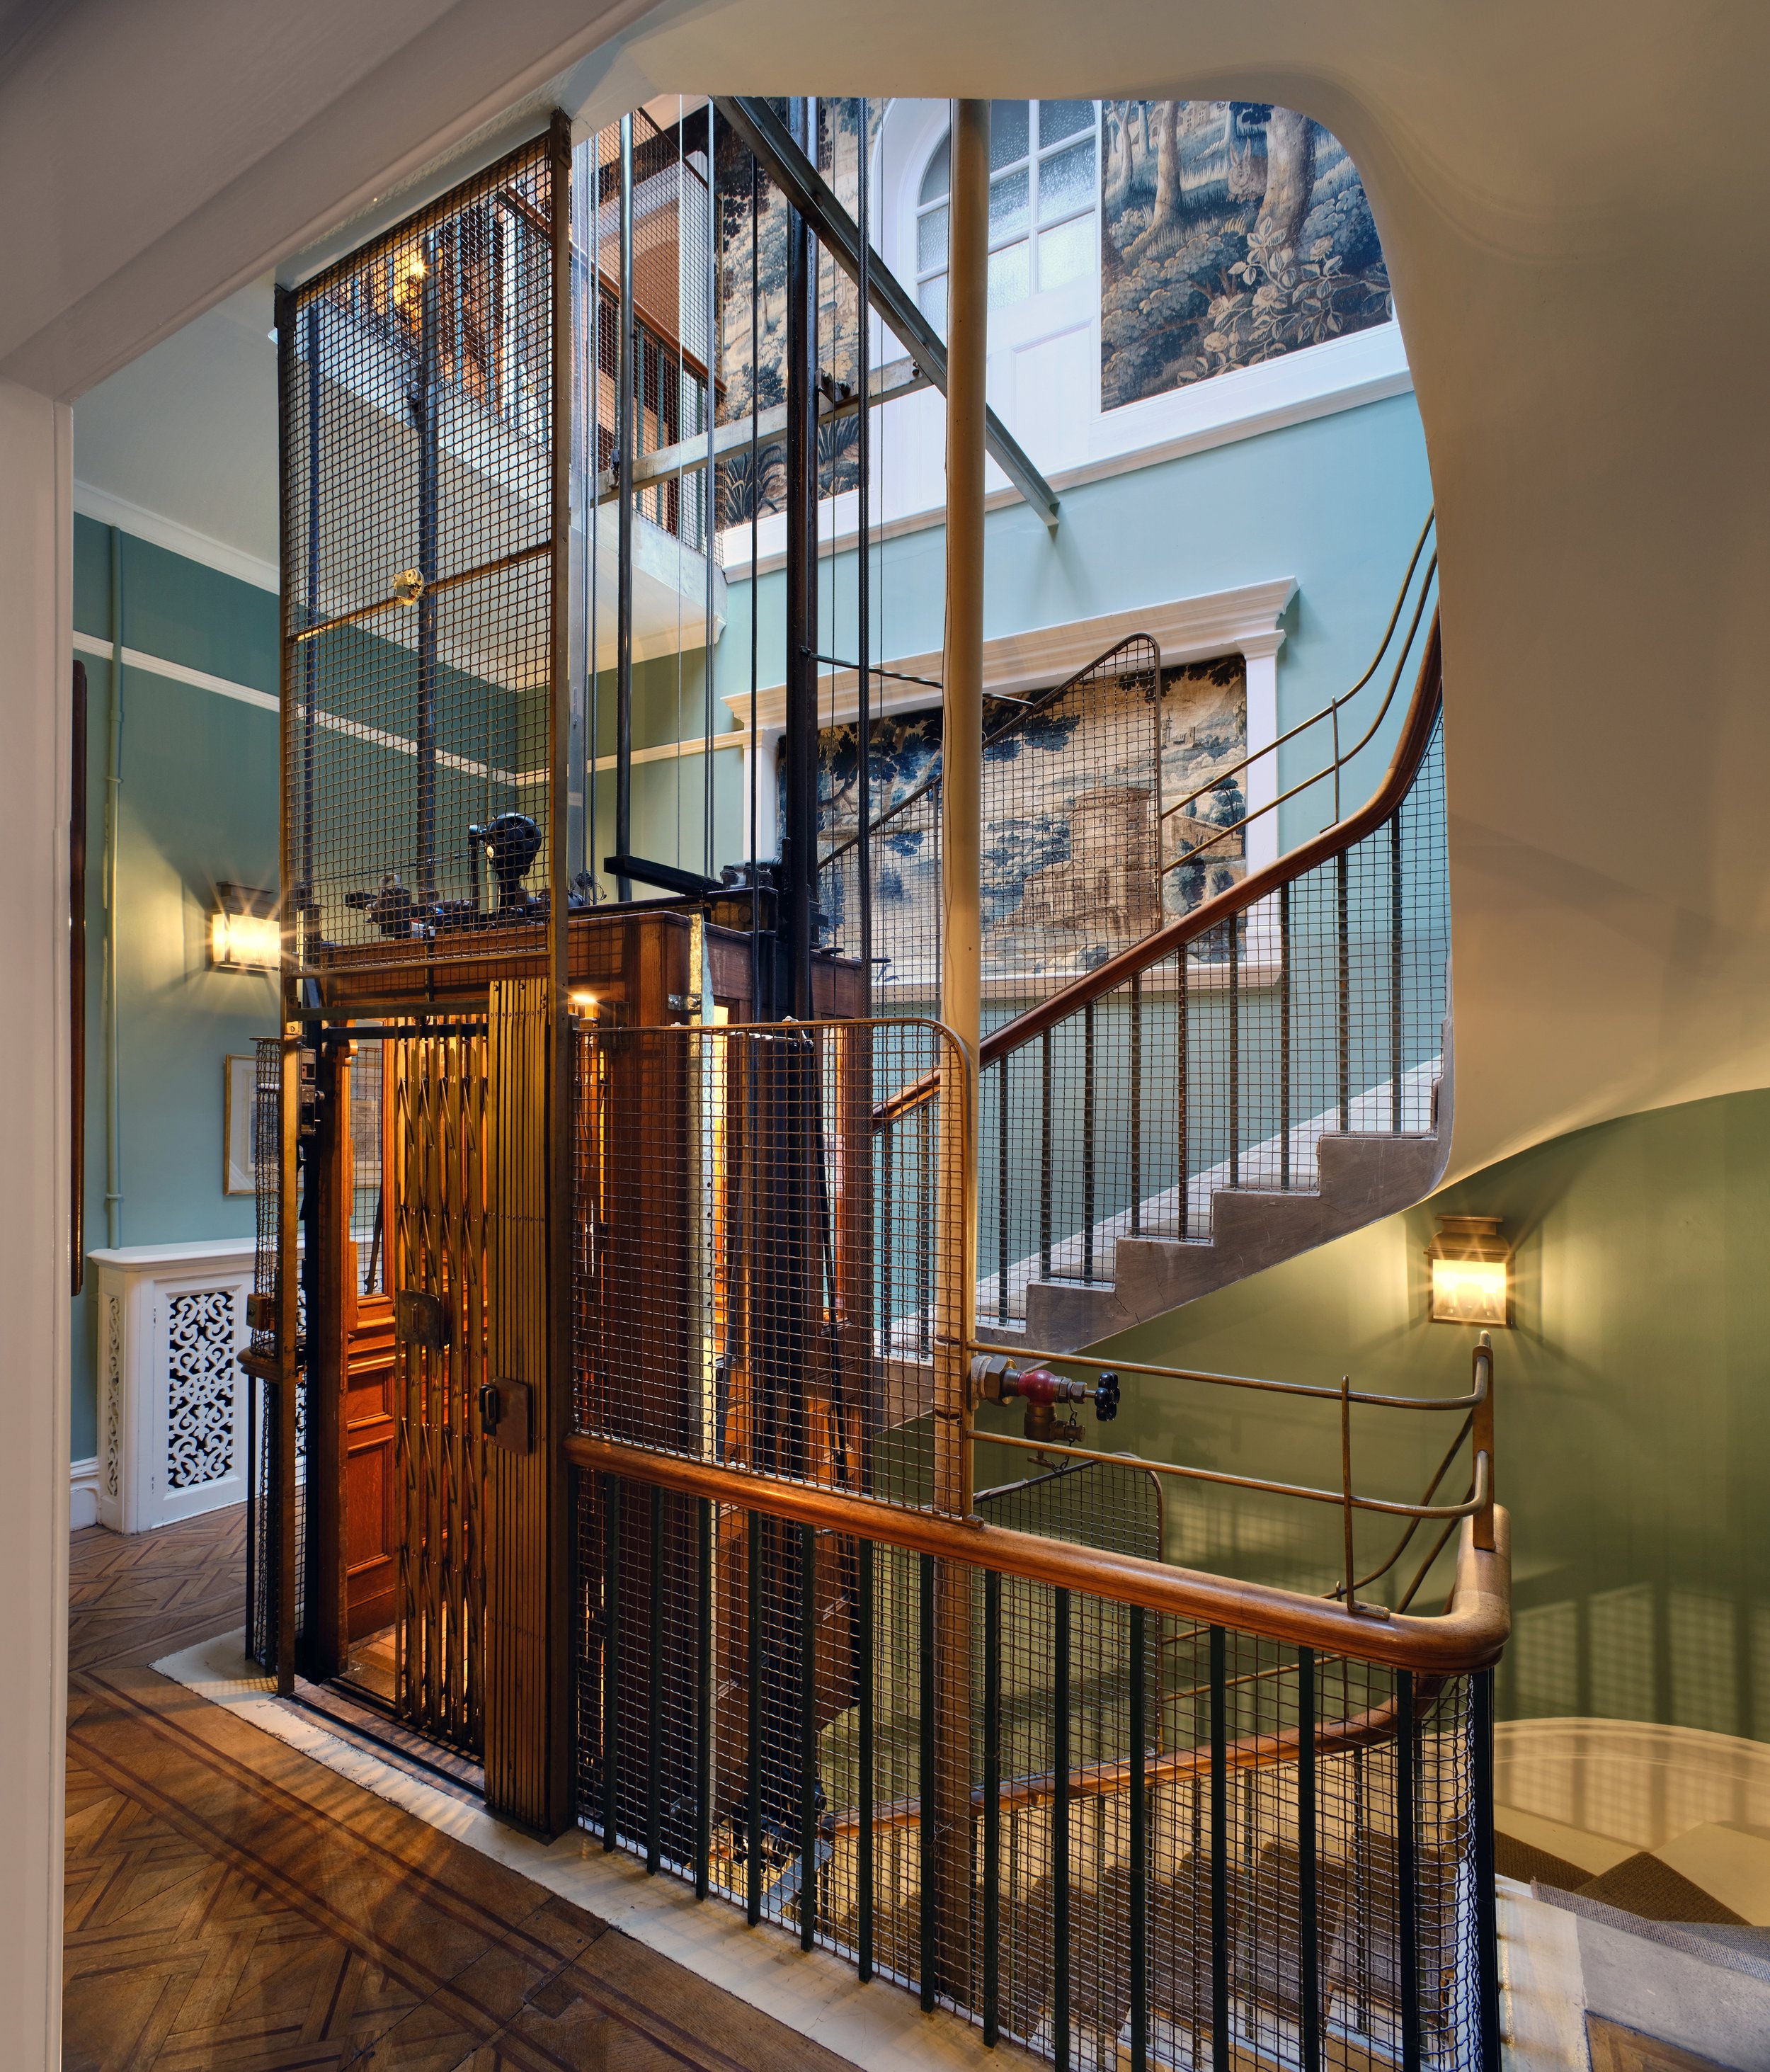 The main staircase and lift entrance to the apartment